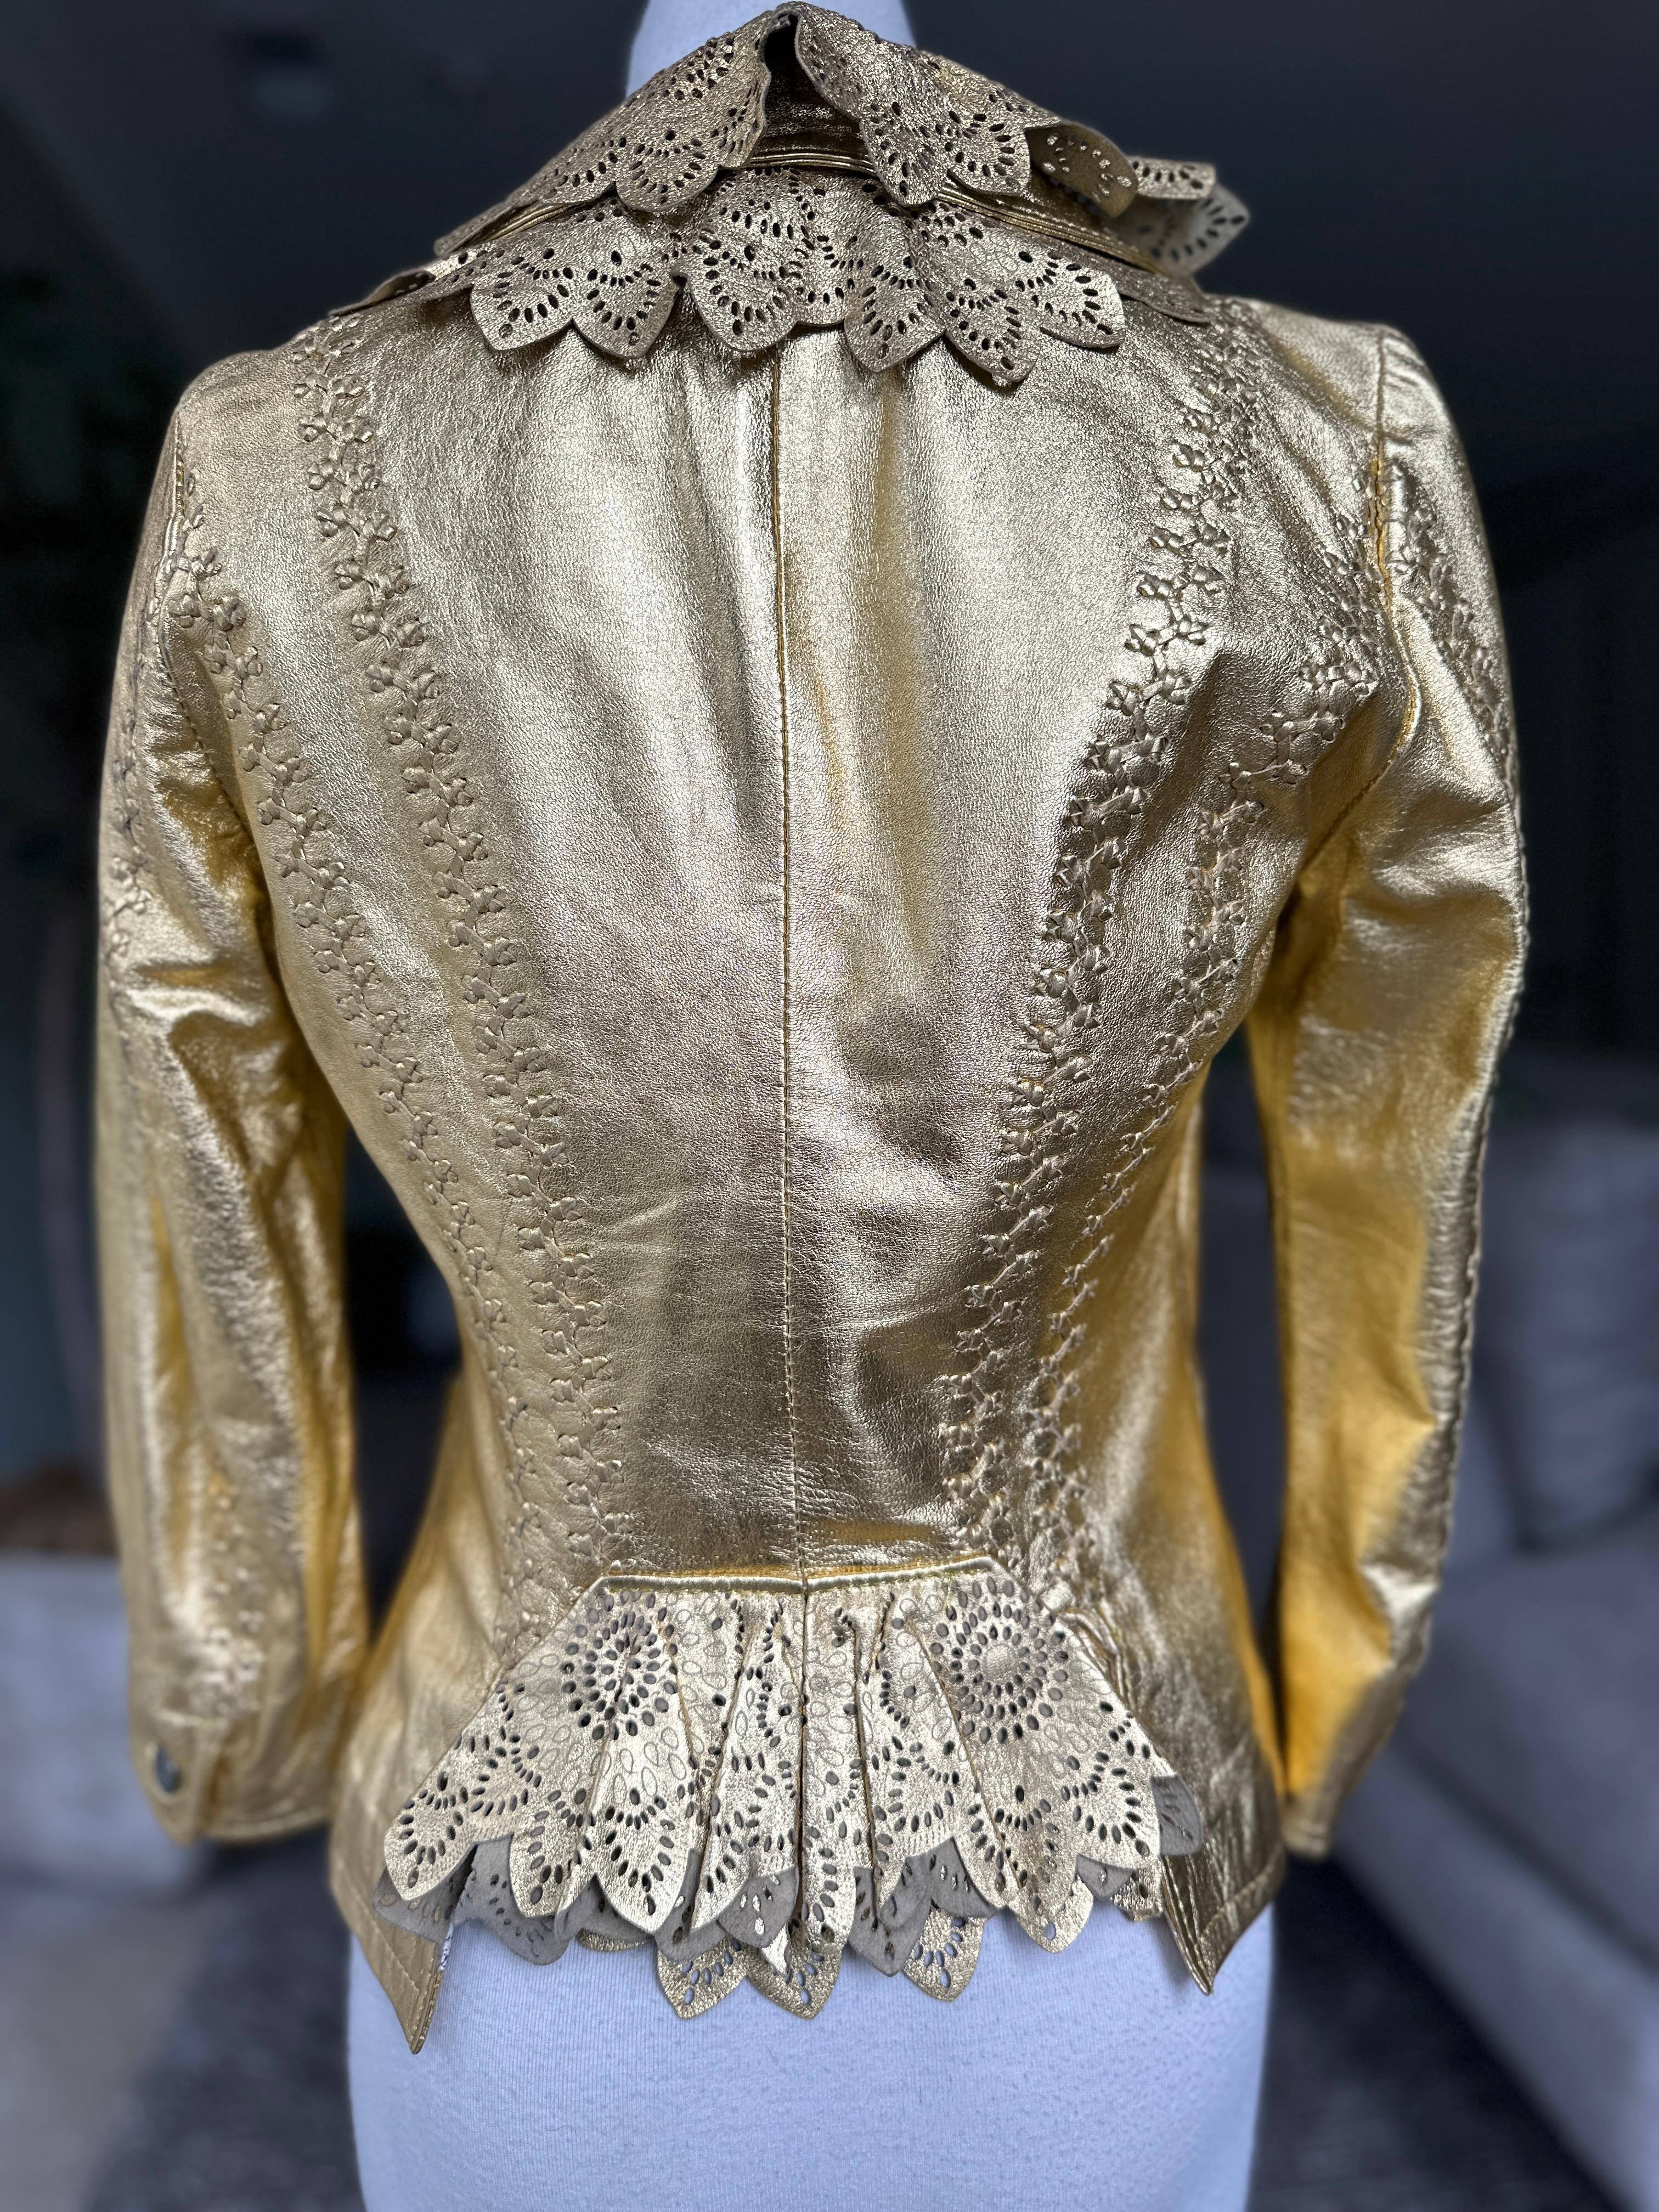 Roberto Cavalli Gold Leather Jacket w Whipstitch and Lace Details for Just Cavalli
Size XS
 Bust 35